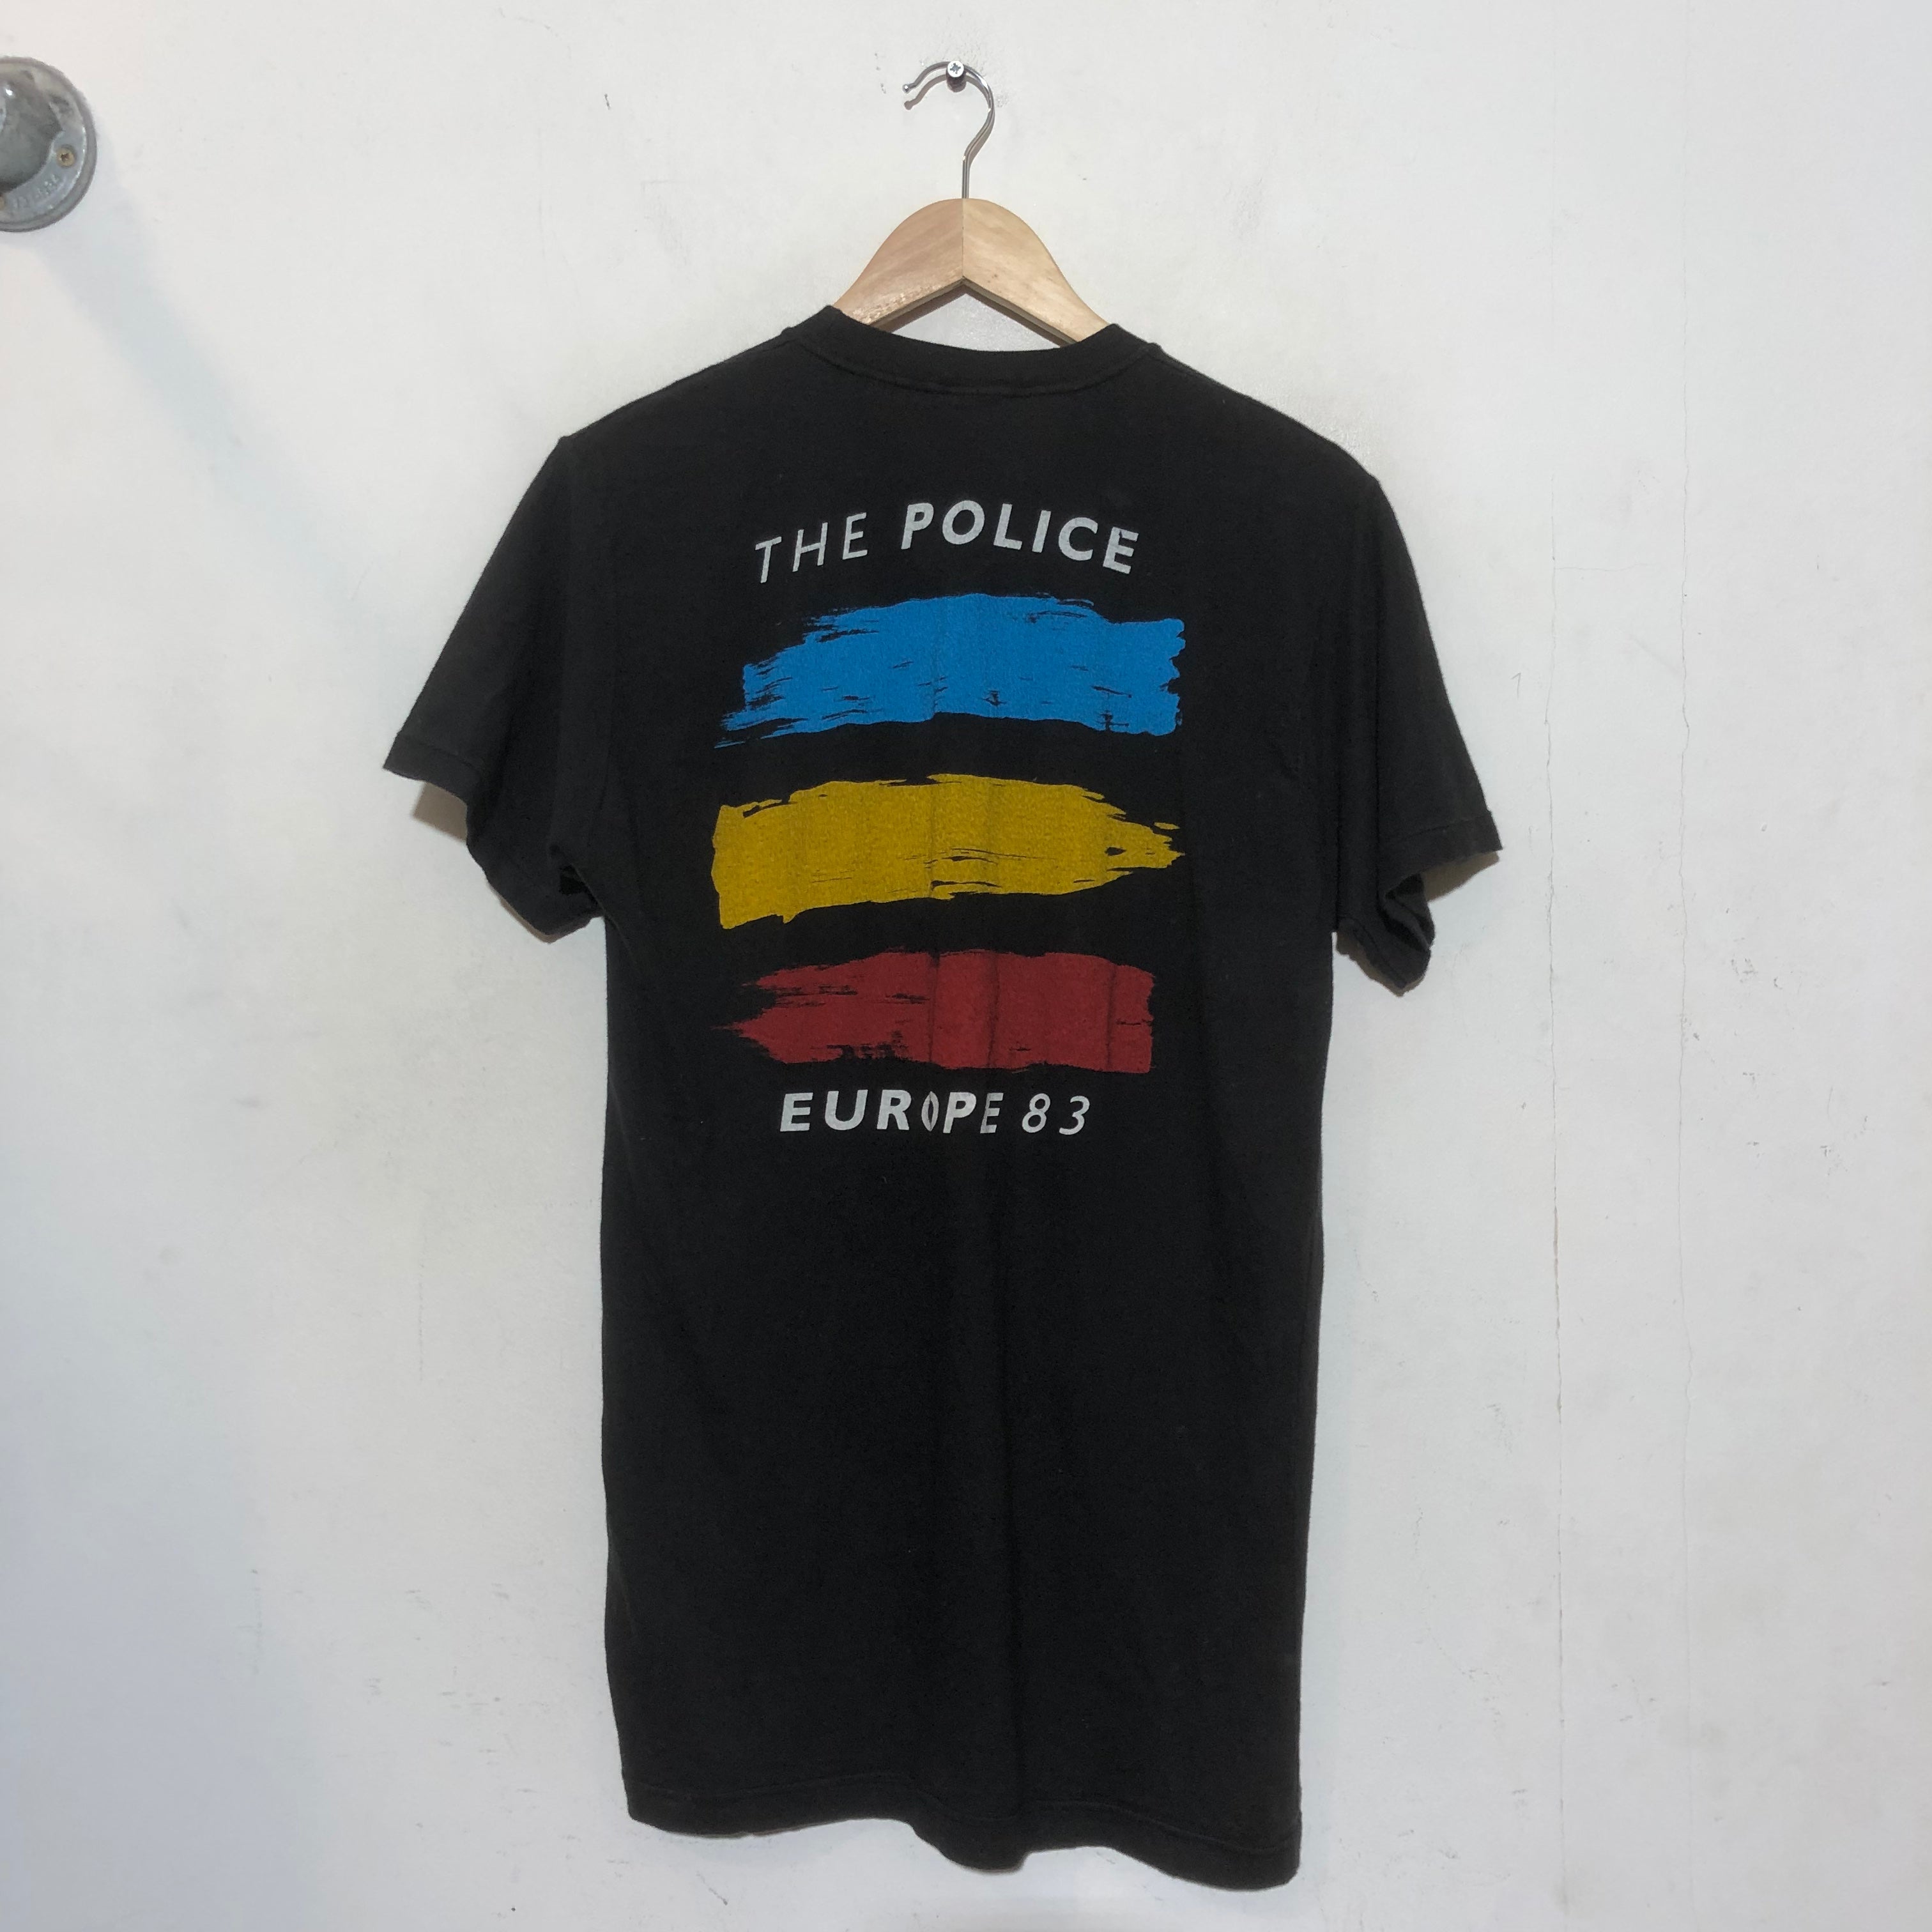 Vintage 1983 The Police band T Shirt - XL